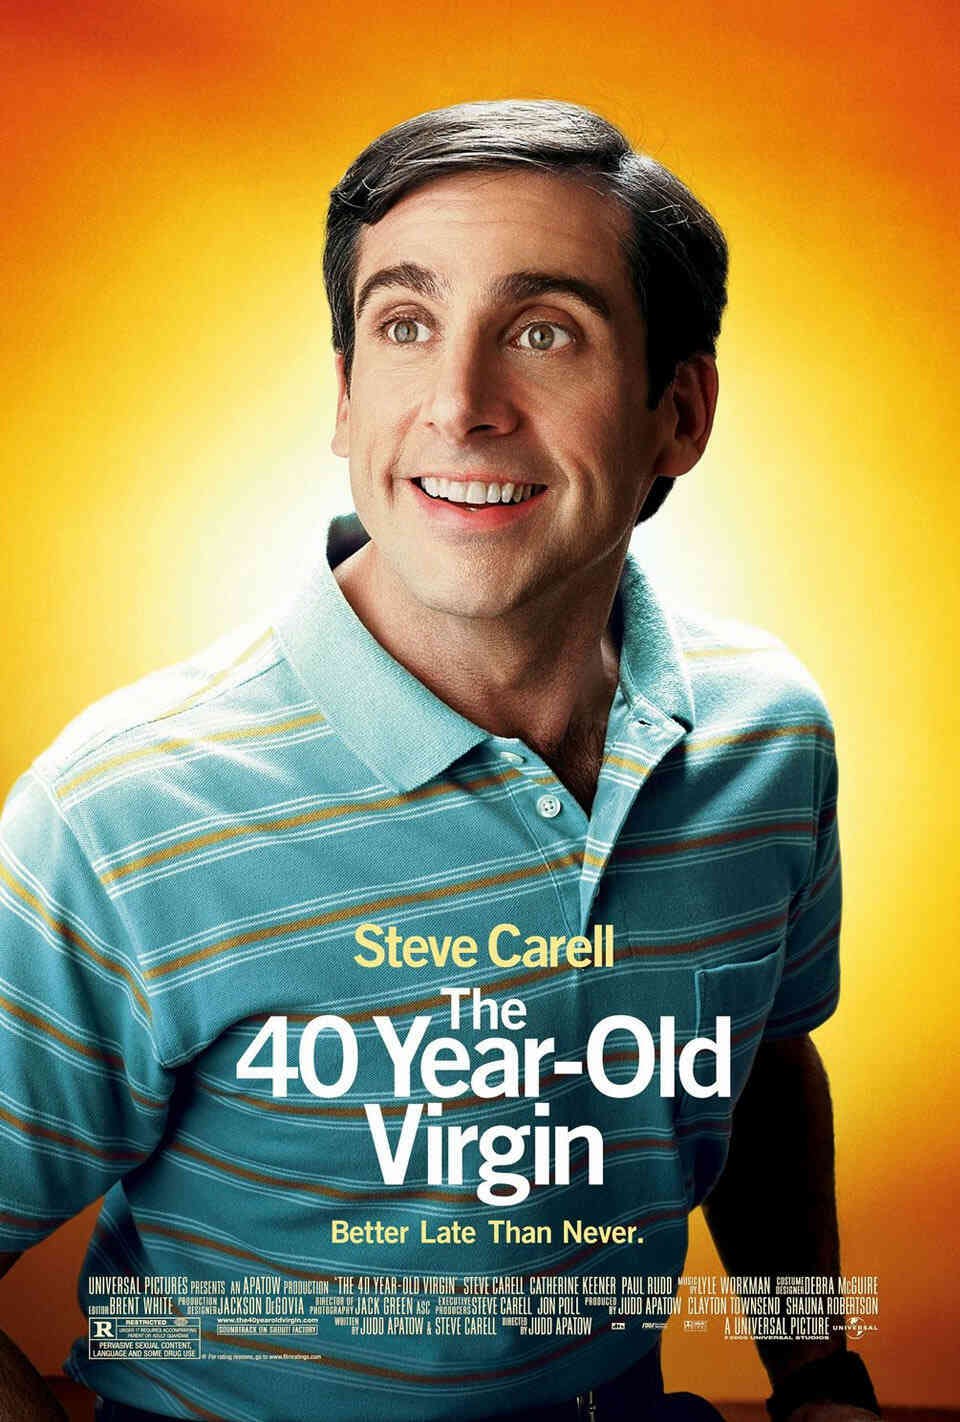 Read The 40-Year-Old Virgin screenplay (poster)